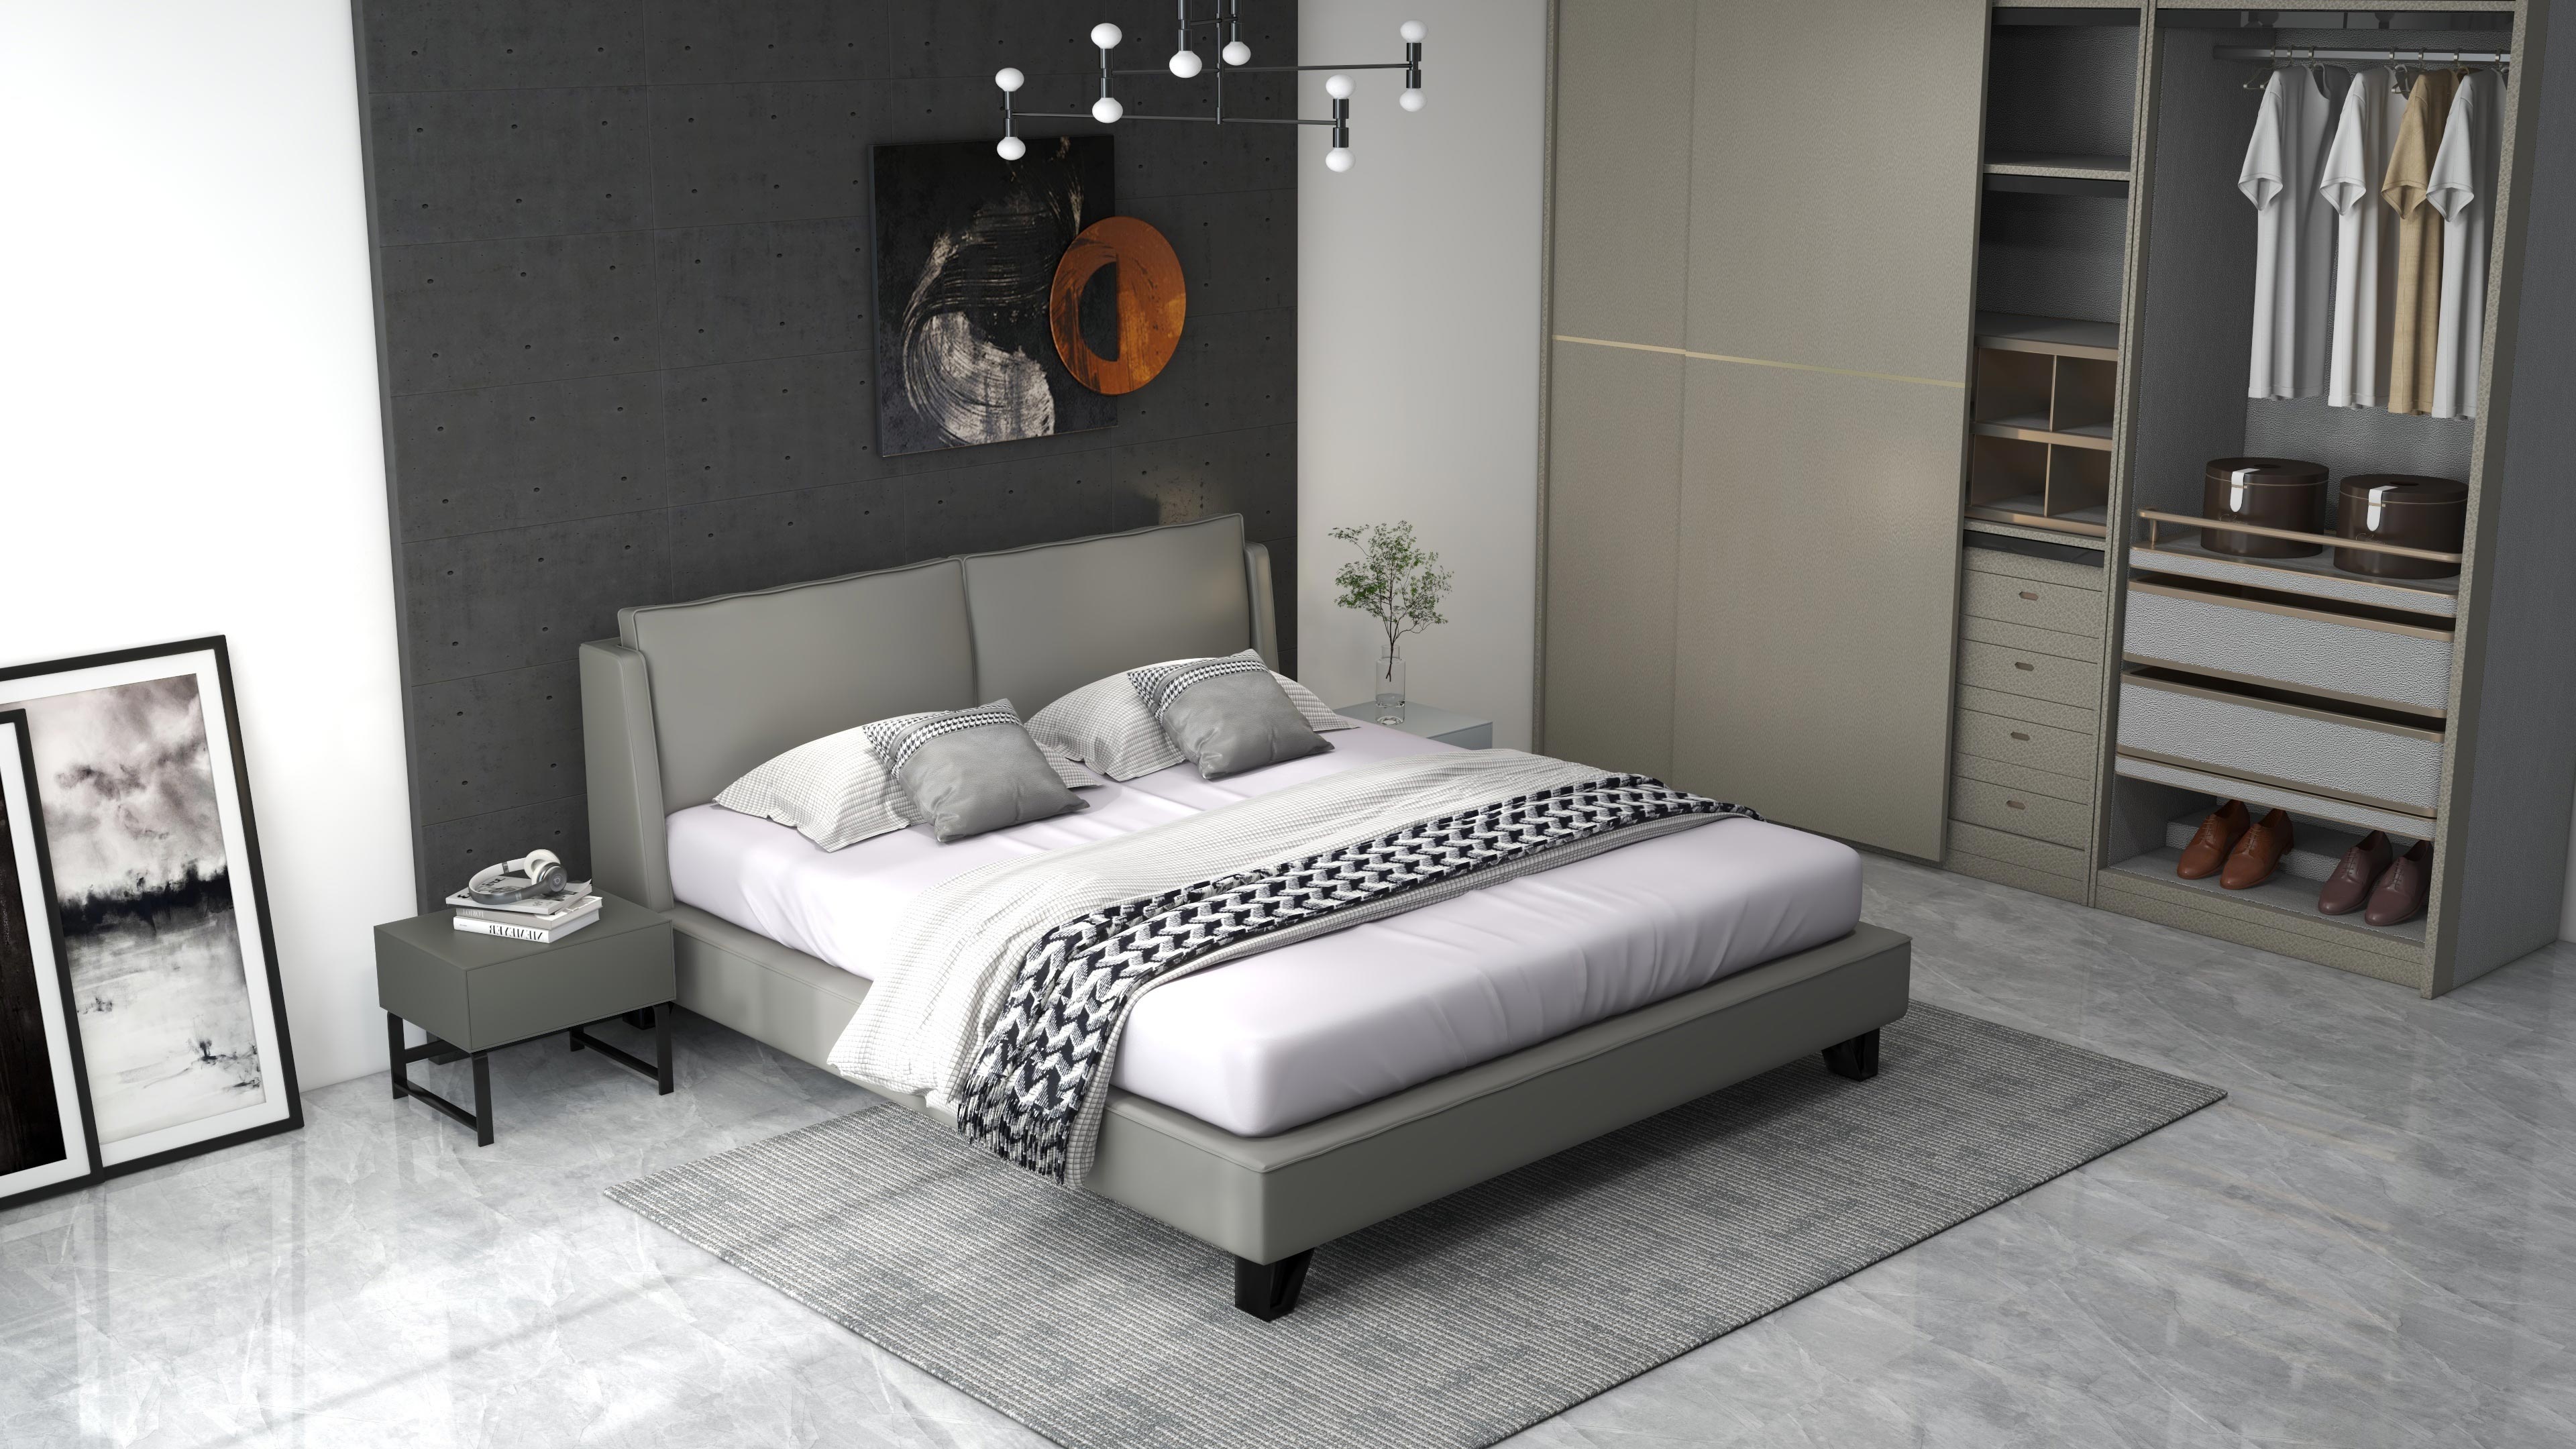 <p><strong>description：</strong></p><p>*bedframe with the 3D slats or motion</p><p>*the design of widen bedside makes the bed look different.</p><p>*Well matched the mattress and bedding.</p><p><br/></p>